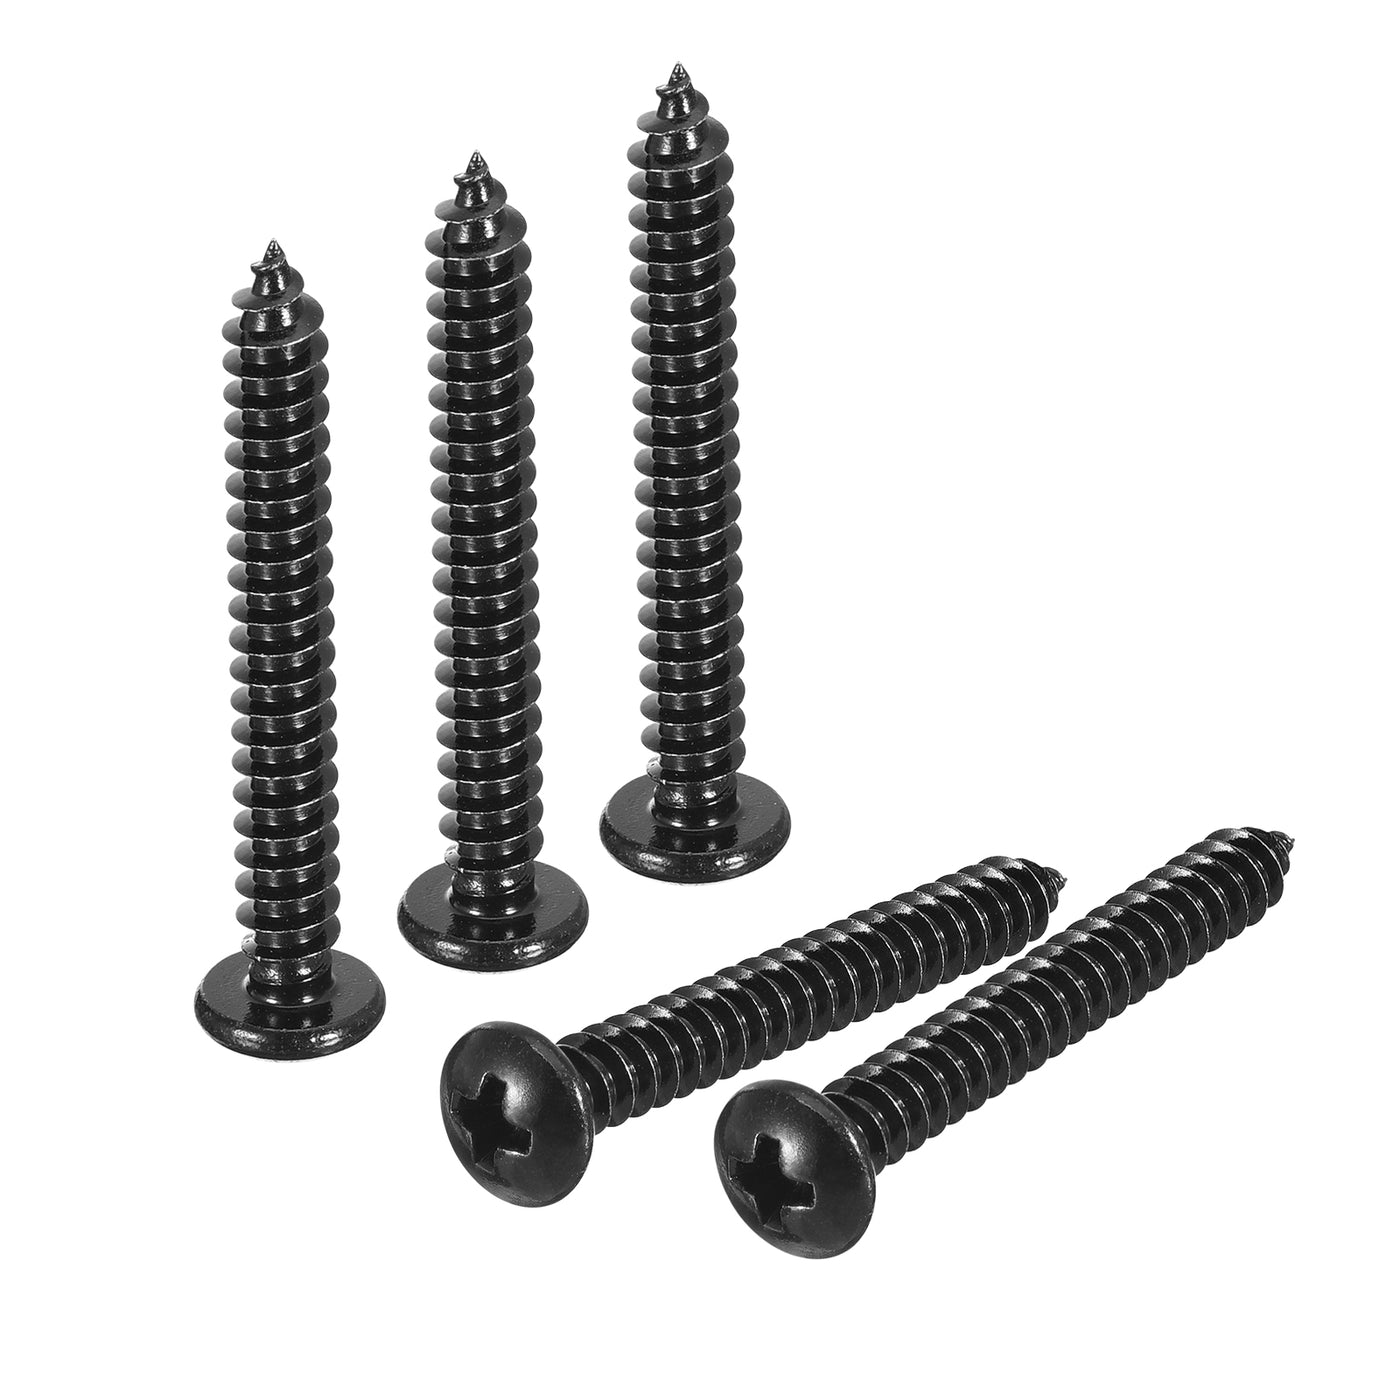 uxcell Uxcell 5mm x 40mm Phillips Pan Head Self-tapping Screw, 50pcs - 304 Stainless Steel Round Head Wood Screw Full Thread (Black)